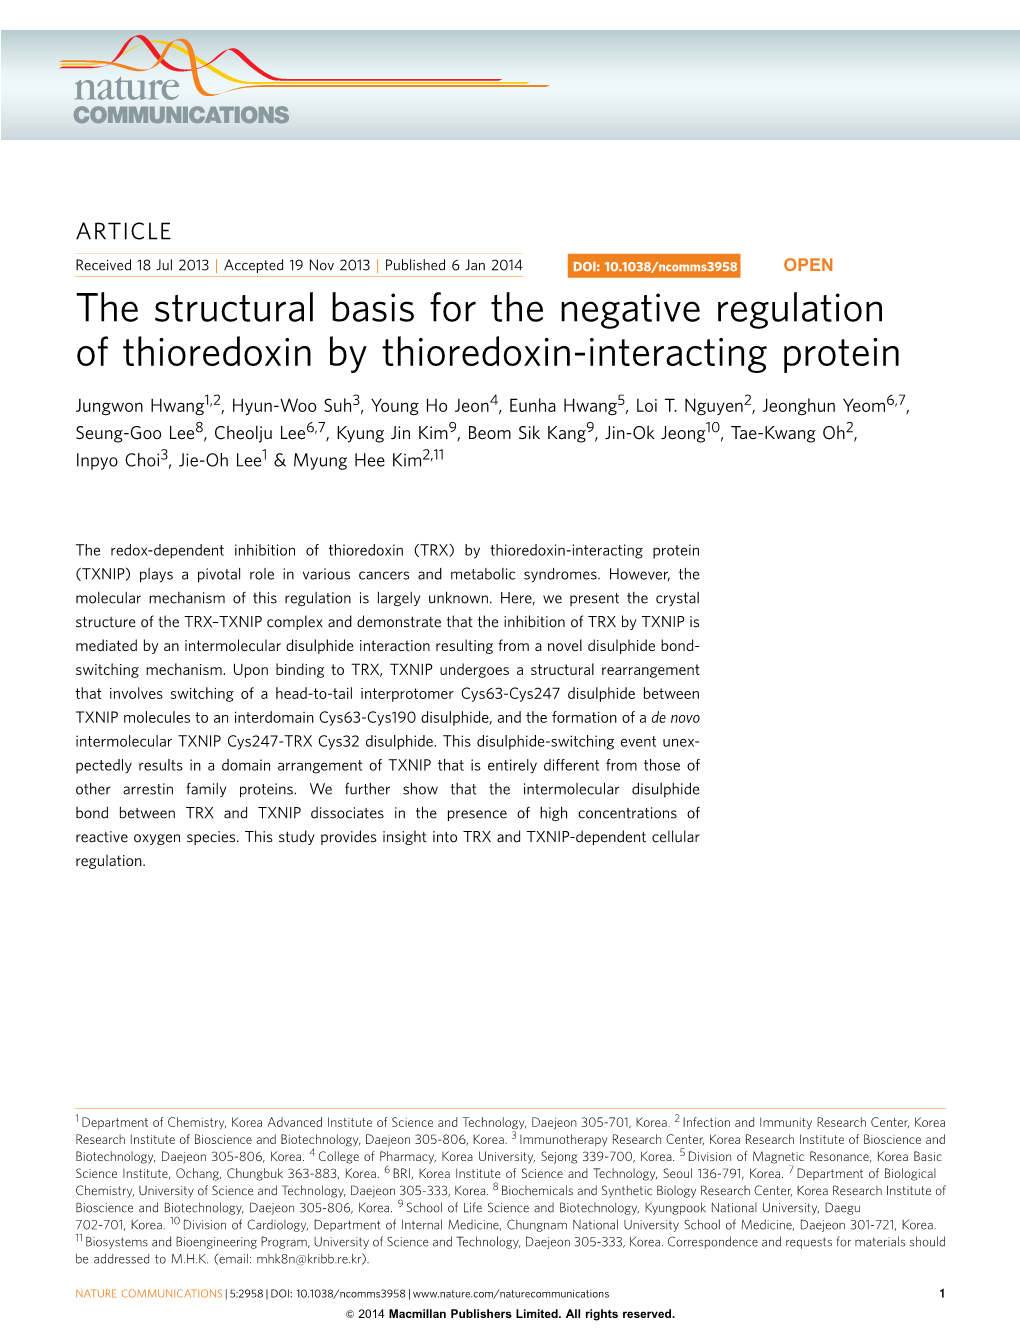 The Structural Basis for the Negative Regulation of Thioredoxin by Thioredoxin-Interacting Protein